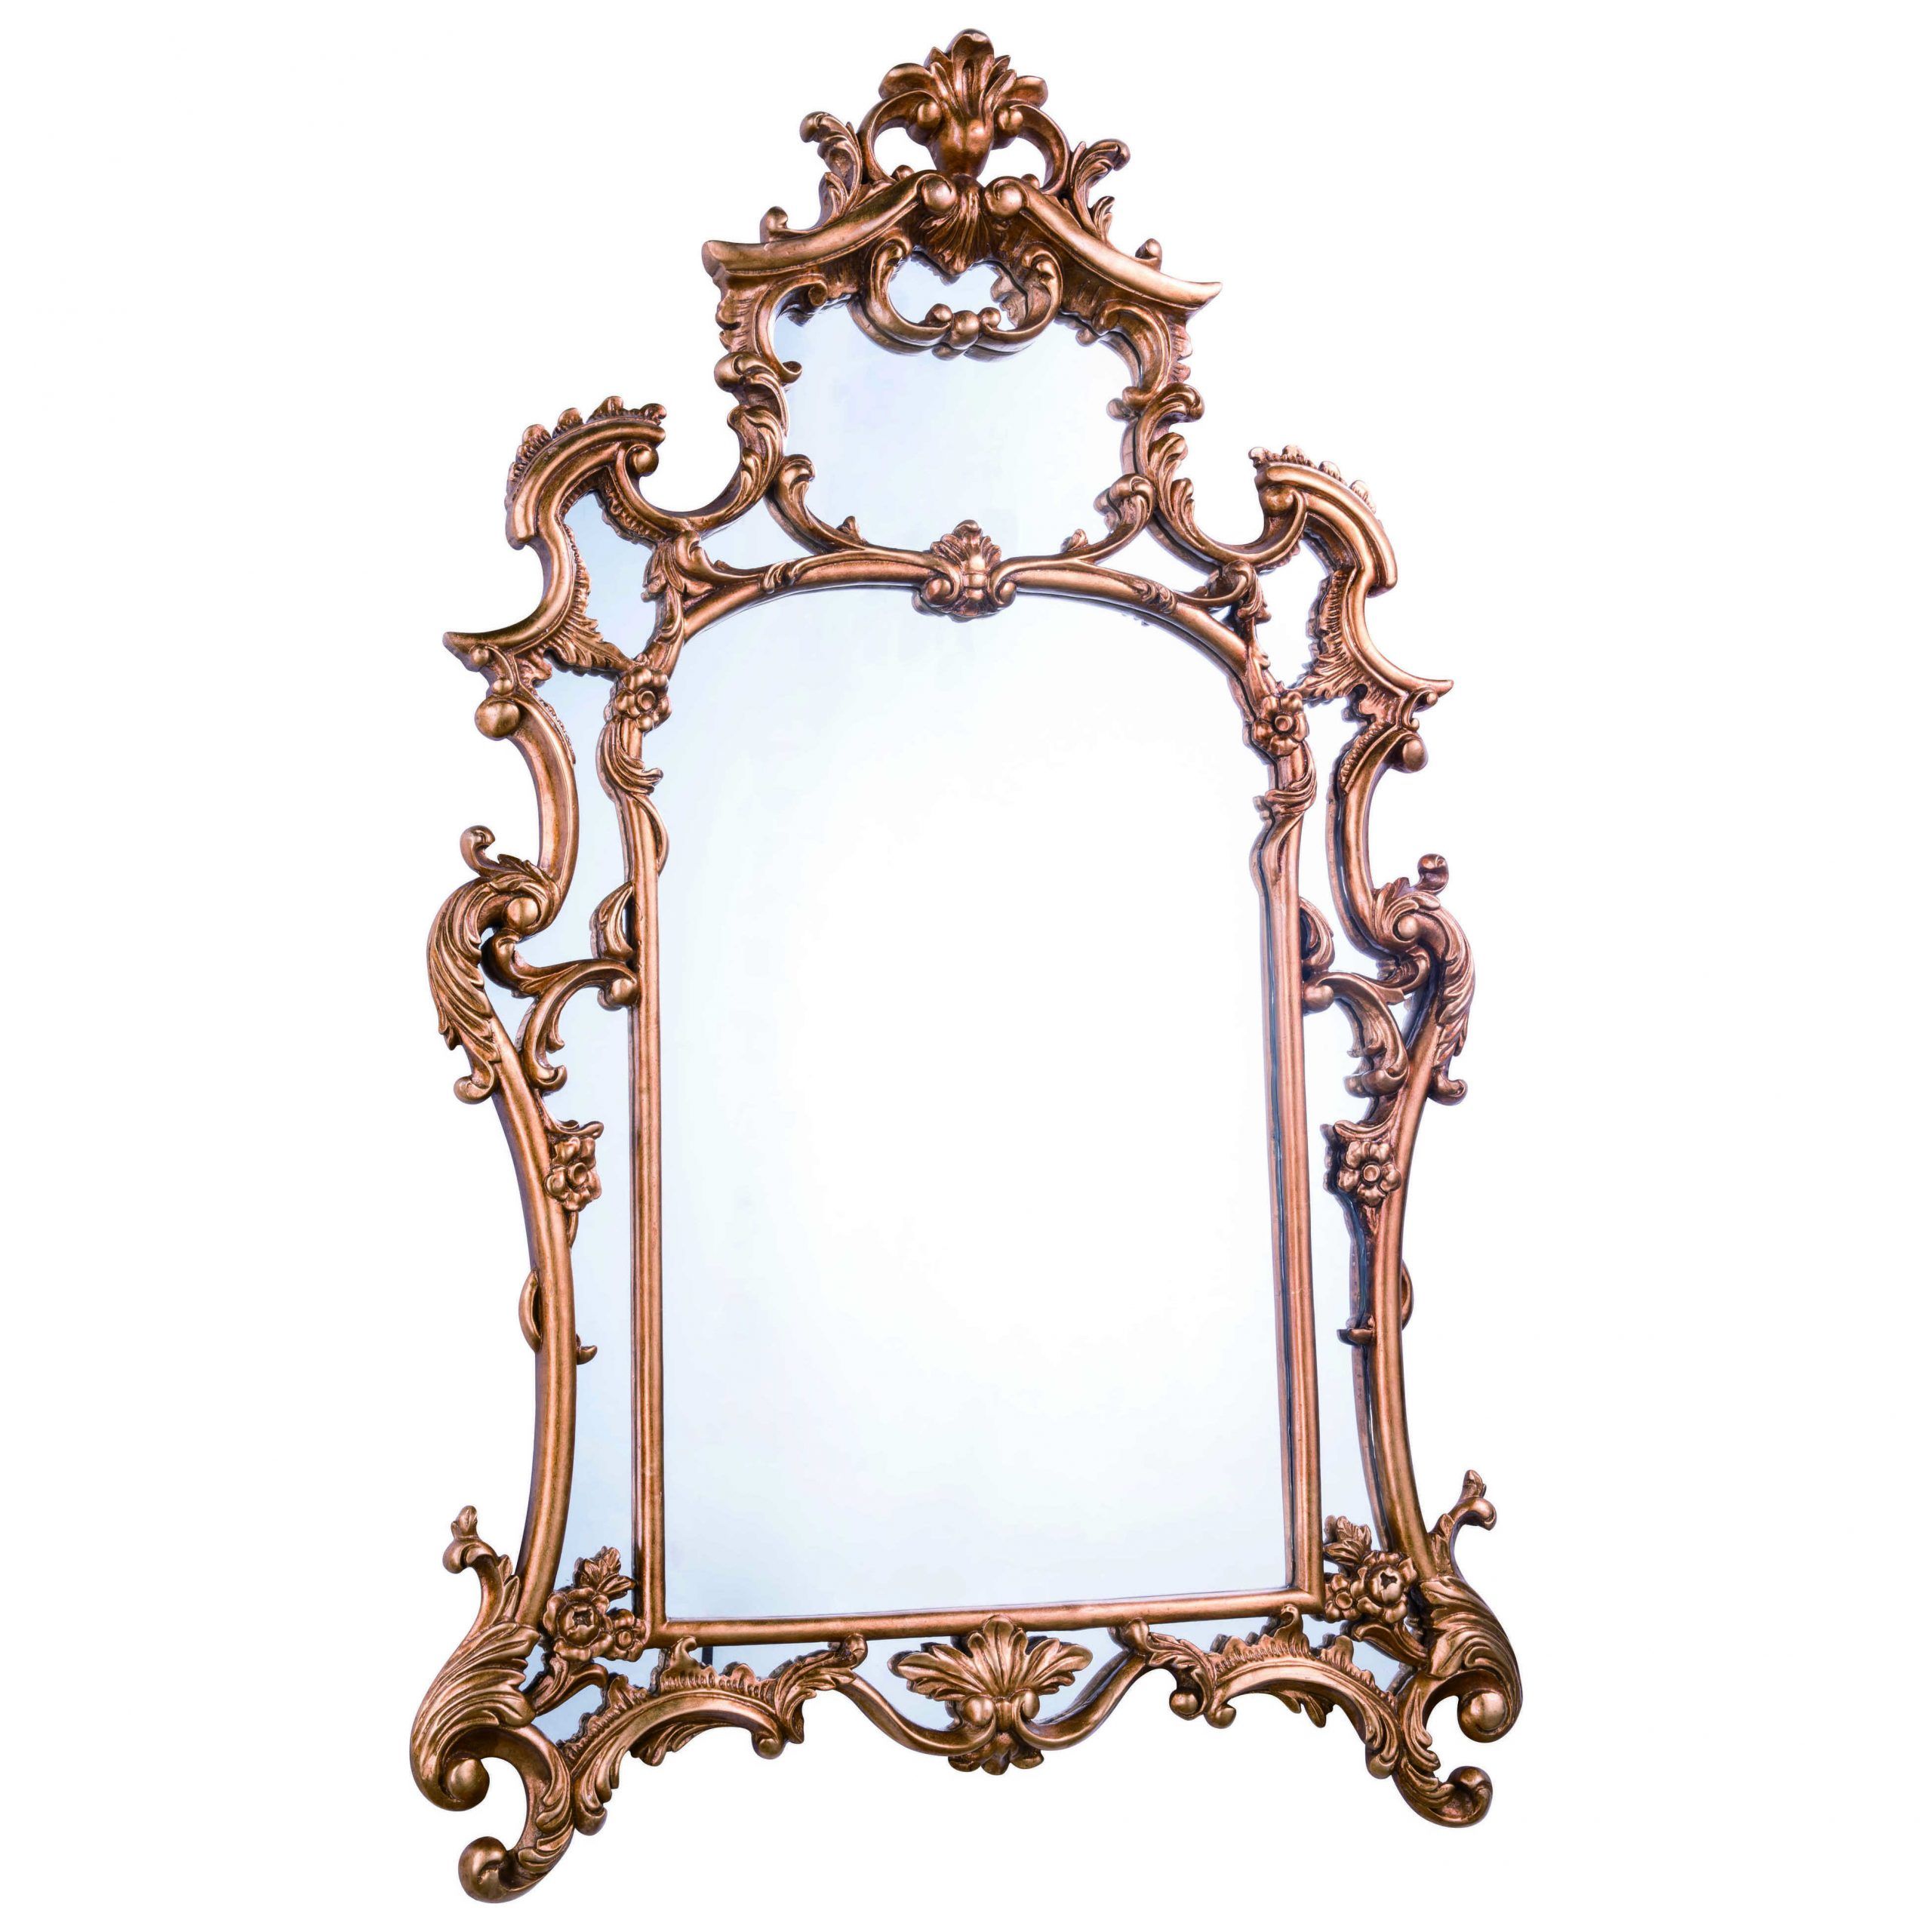 Elegant Lighting Antique 29''w X 48''h Gold Leaf Wall Mirror | Egmr2042 Pertaining To Antiqued Gold Leaf Wall Mirrors (View 1 of 15)